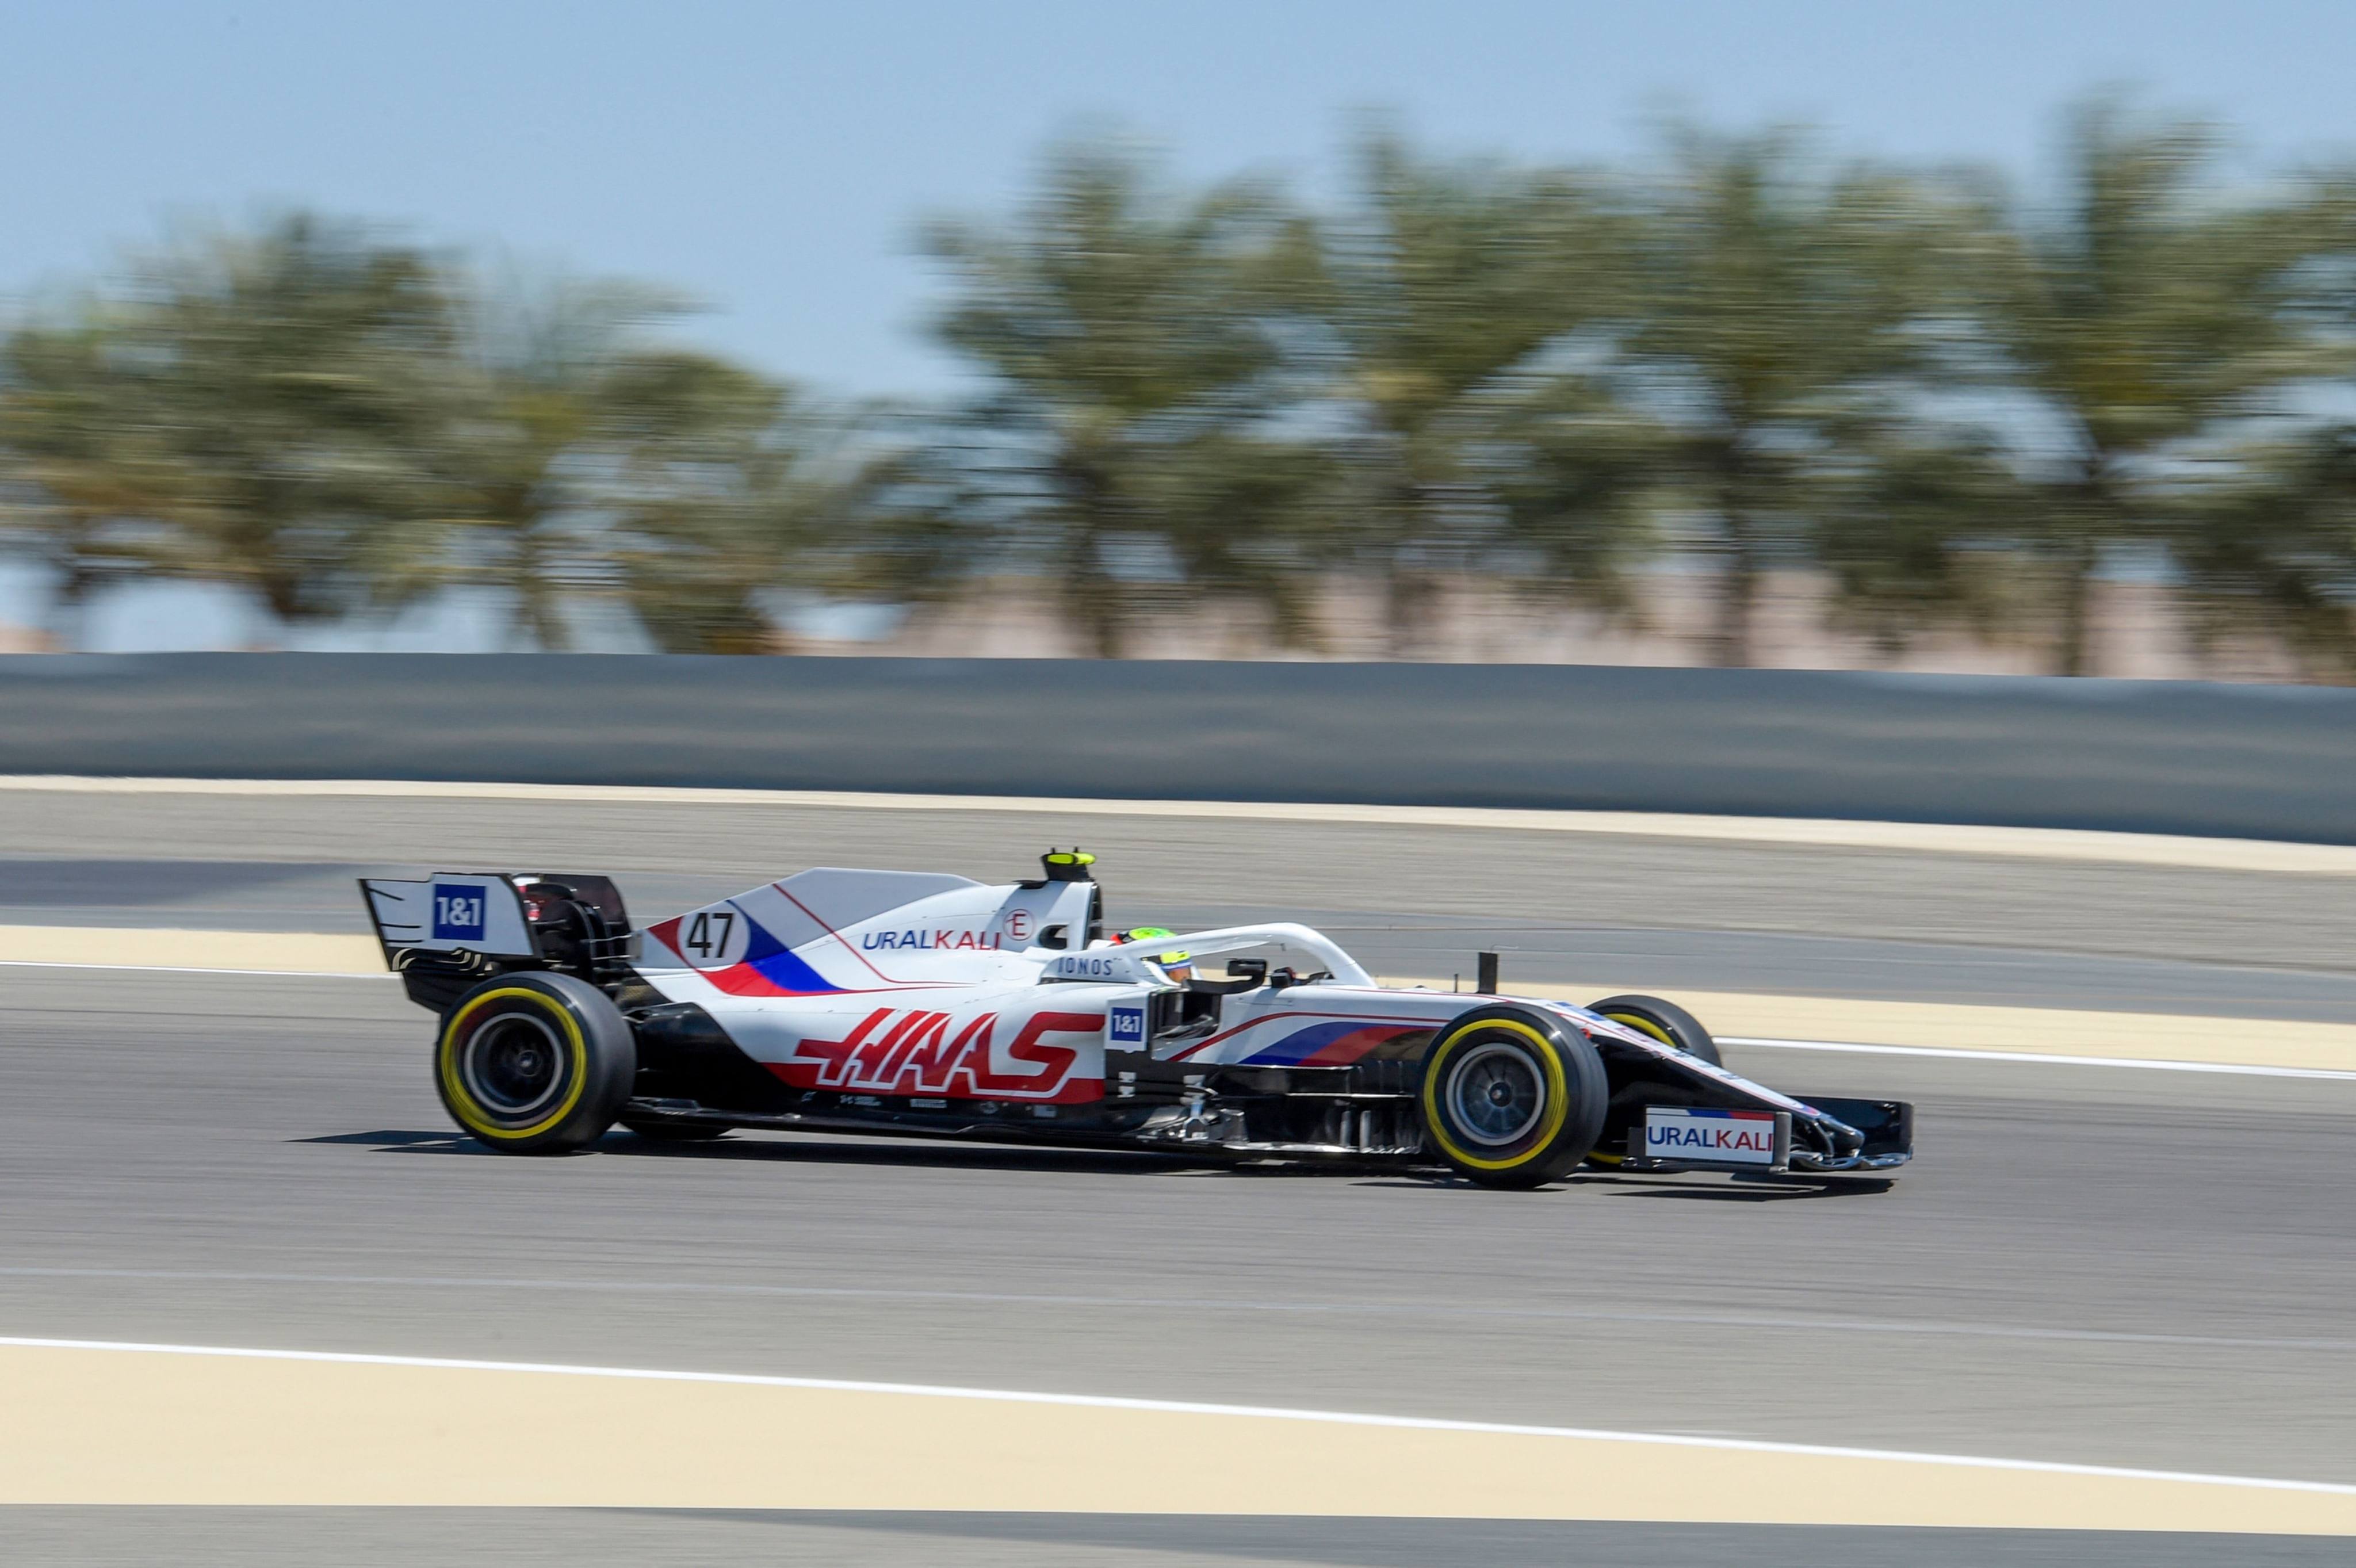 Haas are the most recent completely new Formula One team to enter, debuting in 2016. Photo: AFP